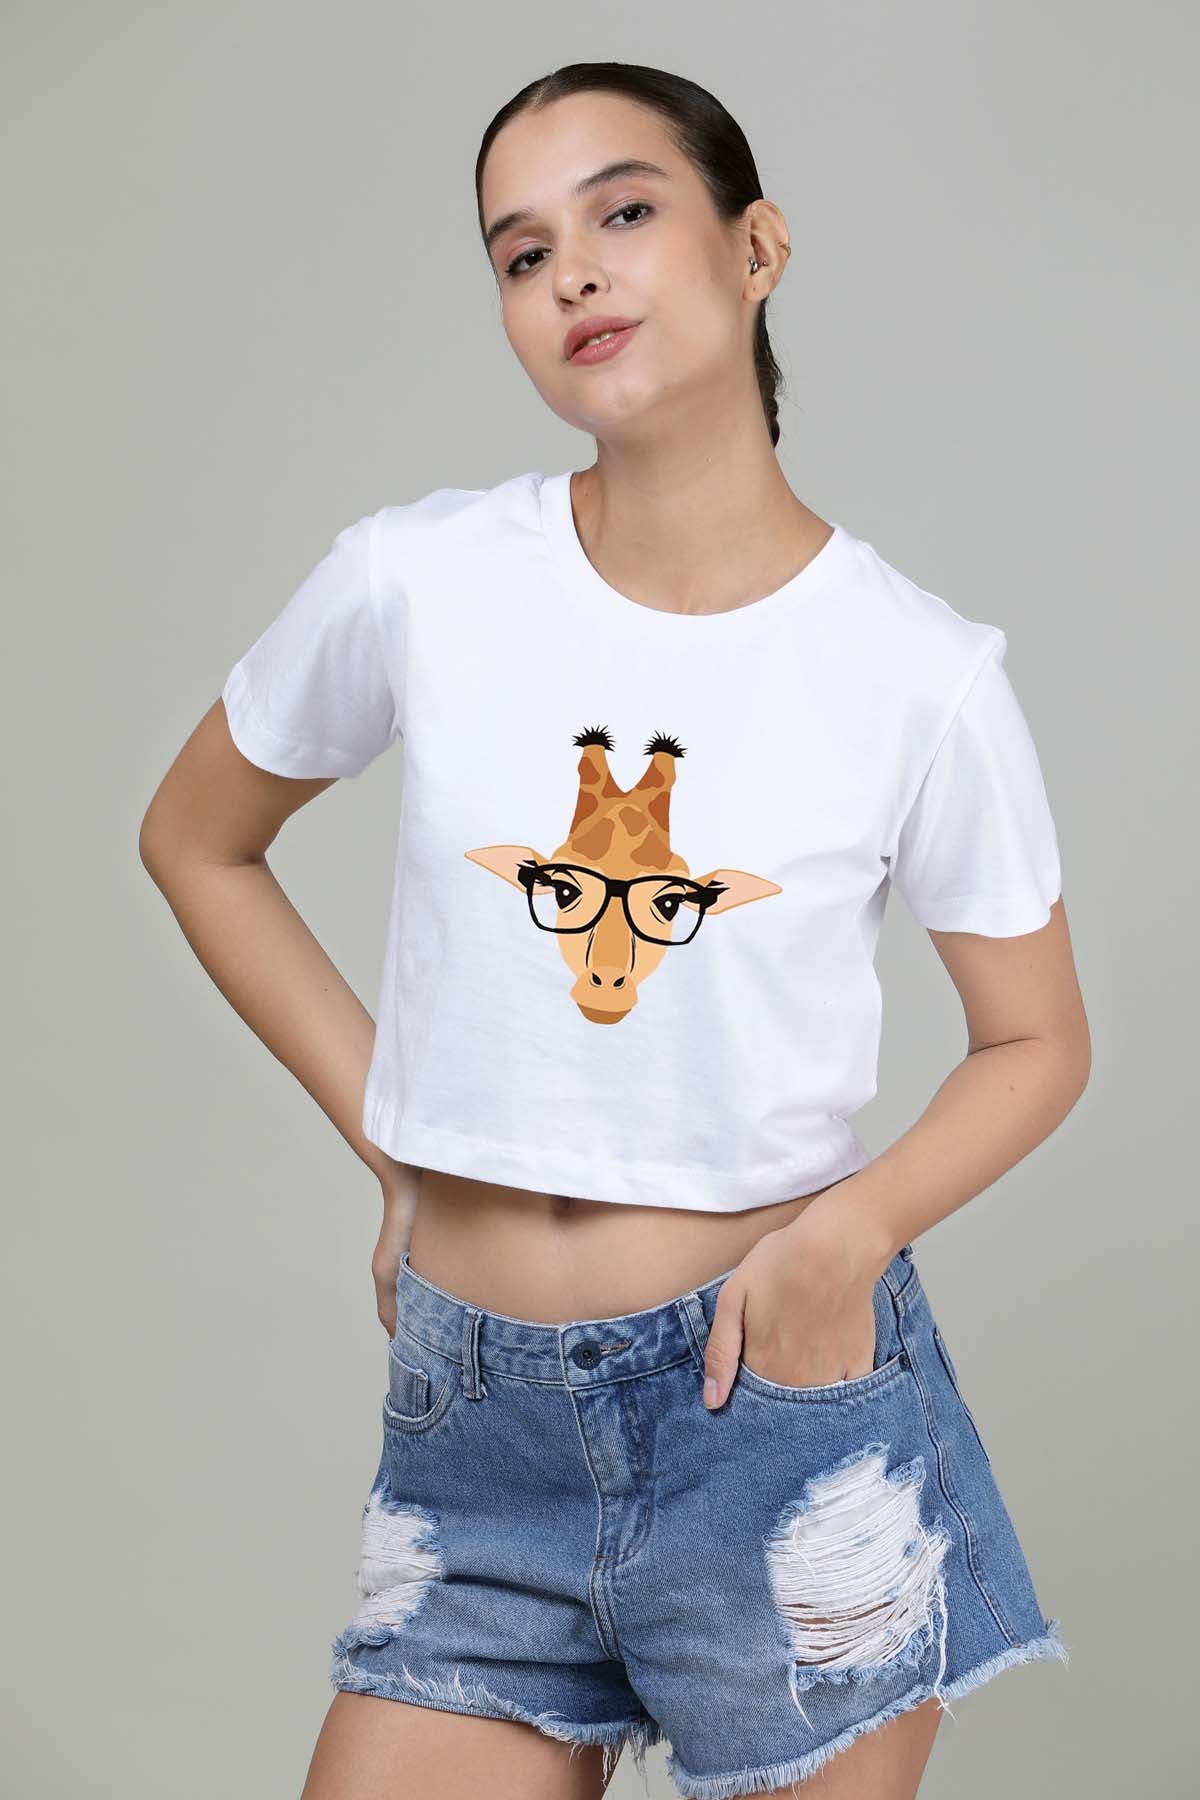 Giraffe With Glasses Printed Crop Top